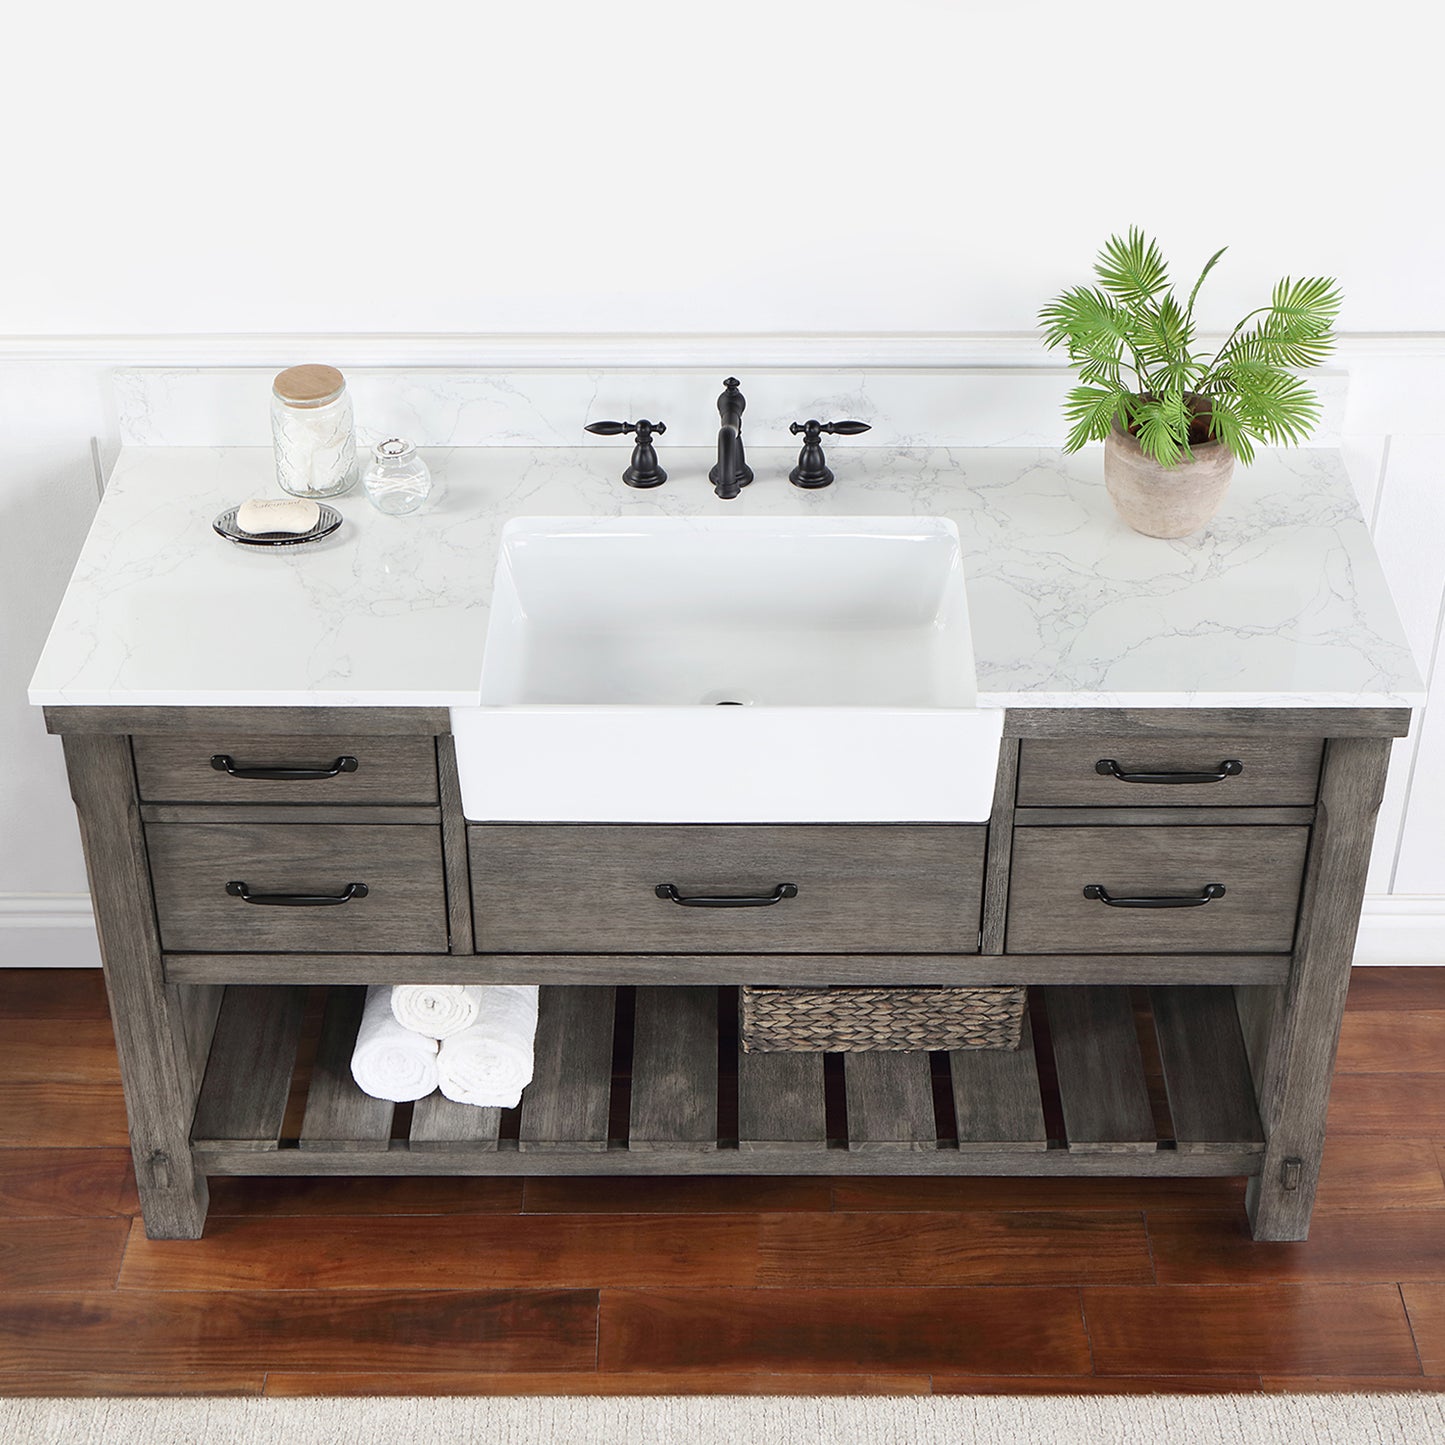 Villareal 60" Single Bath Vanity in Classical Grey with Composite Stone Top in White, White Farmhouse Basin